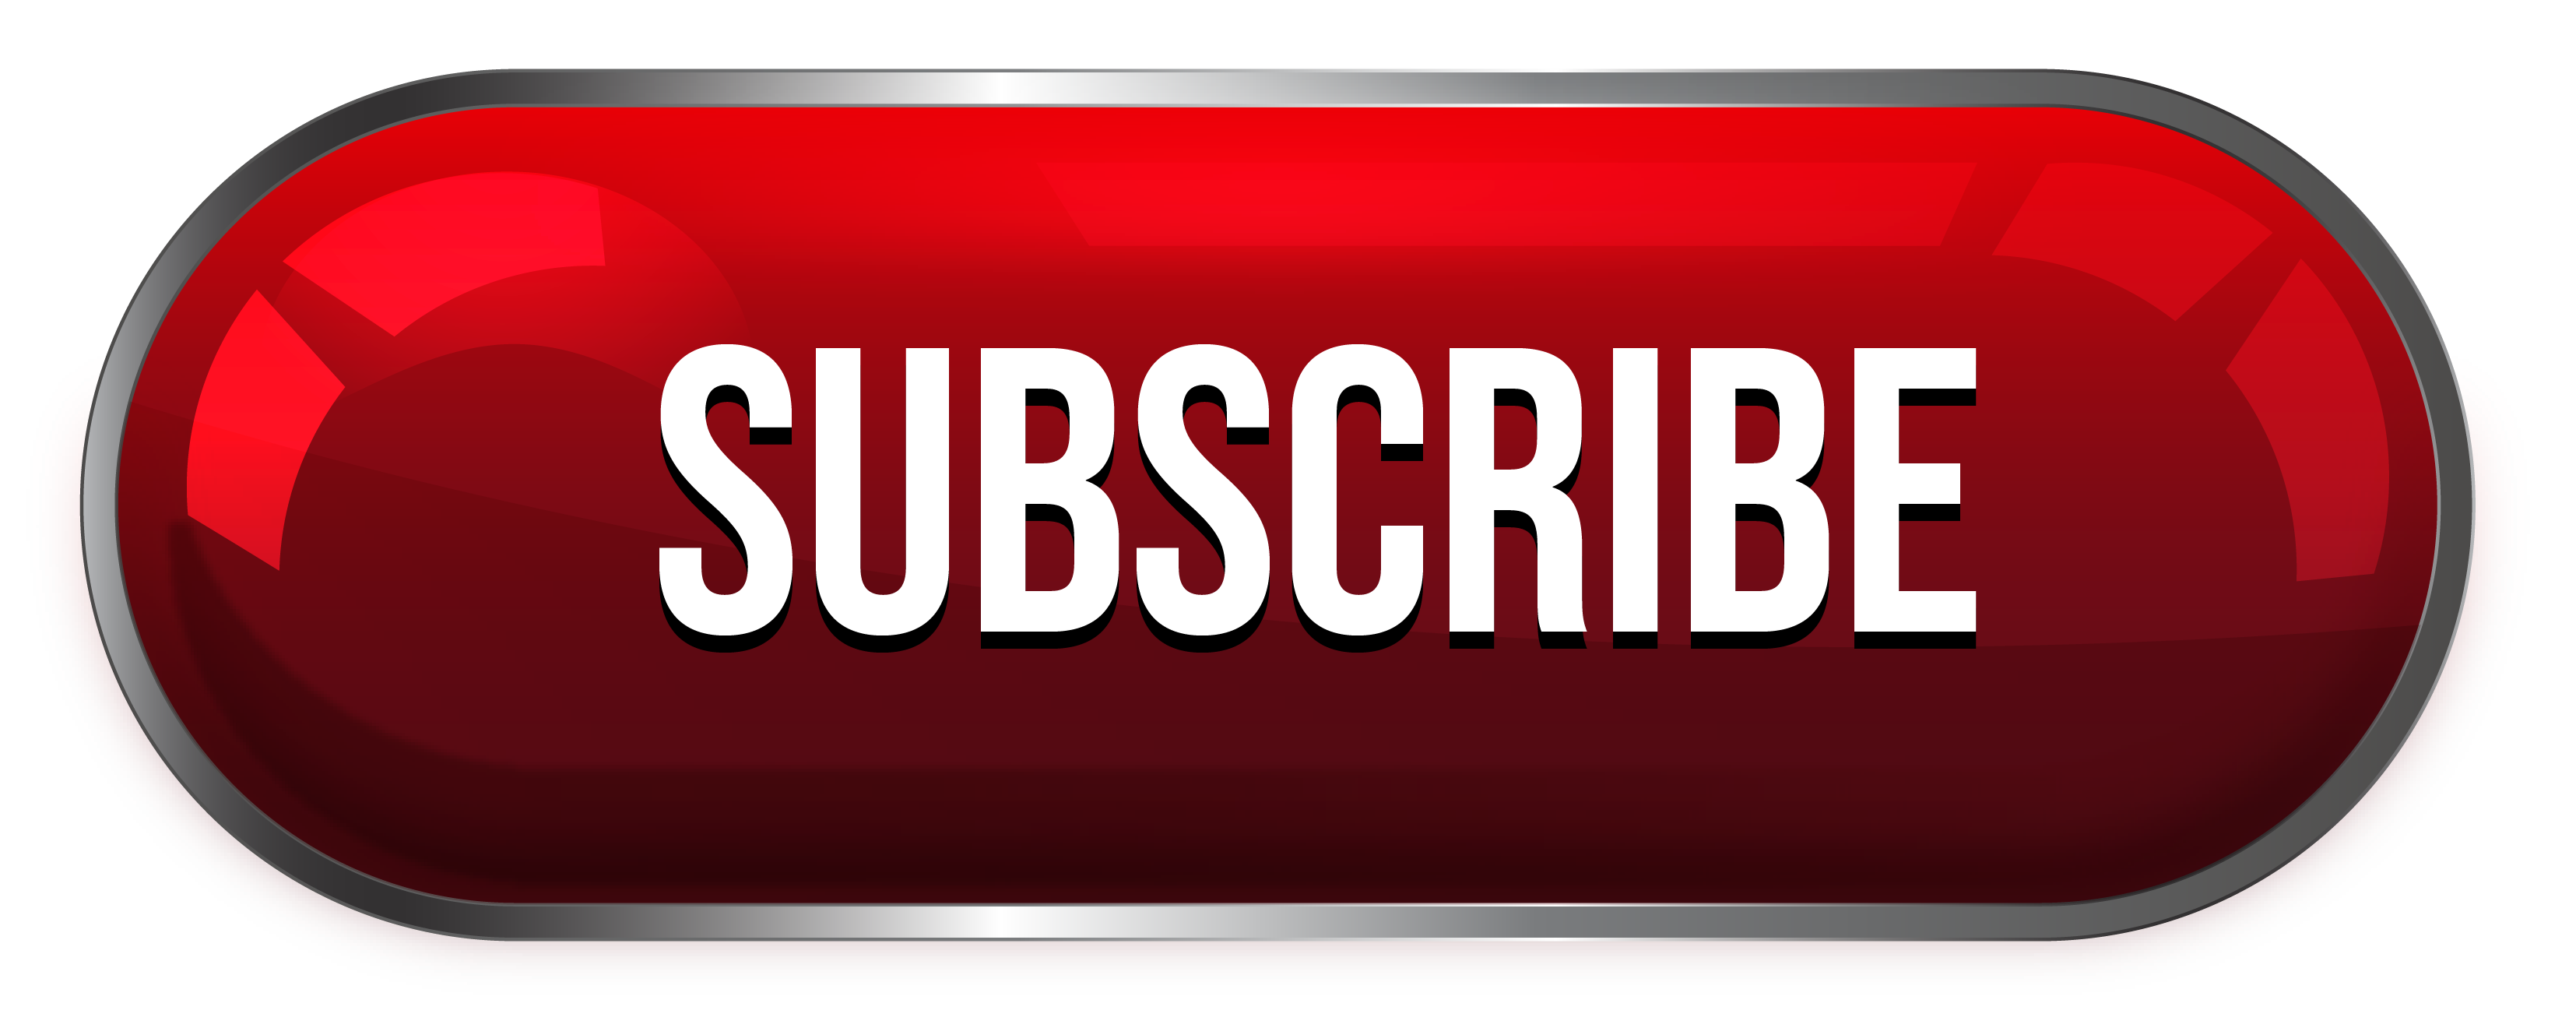 Youtube Subscribe Button Png Background Image Png Arts Images